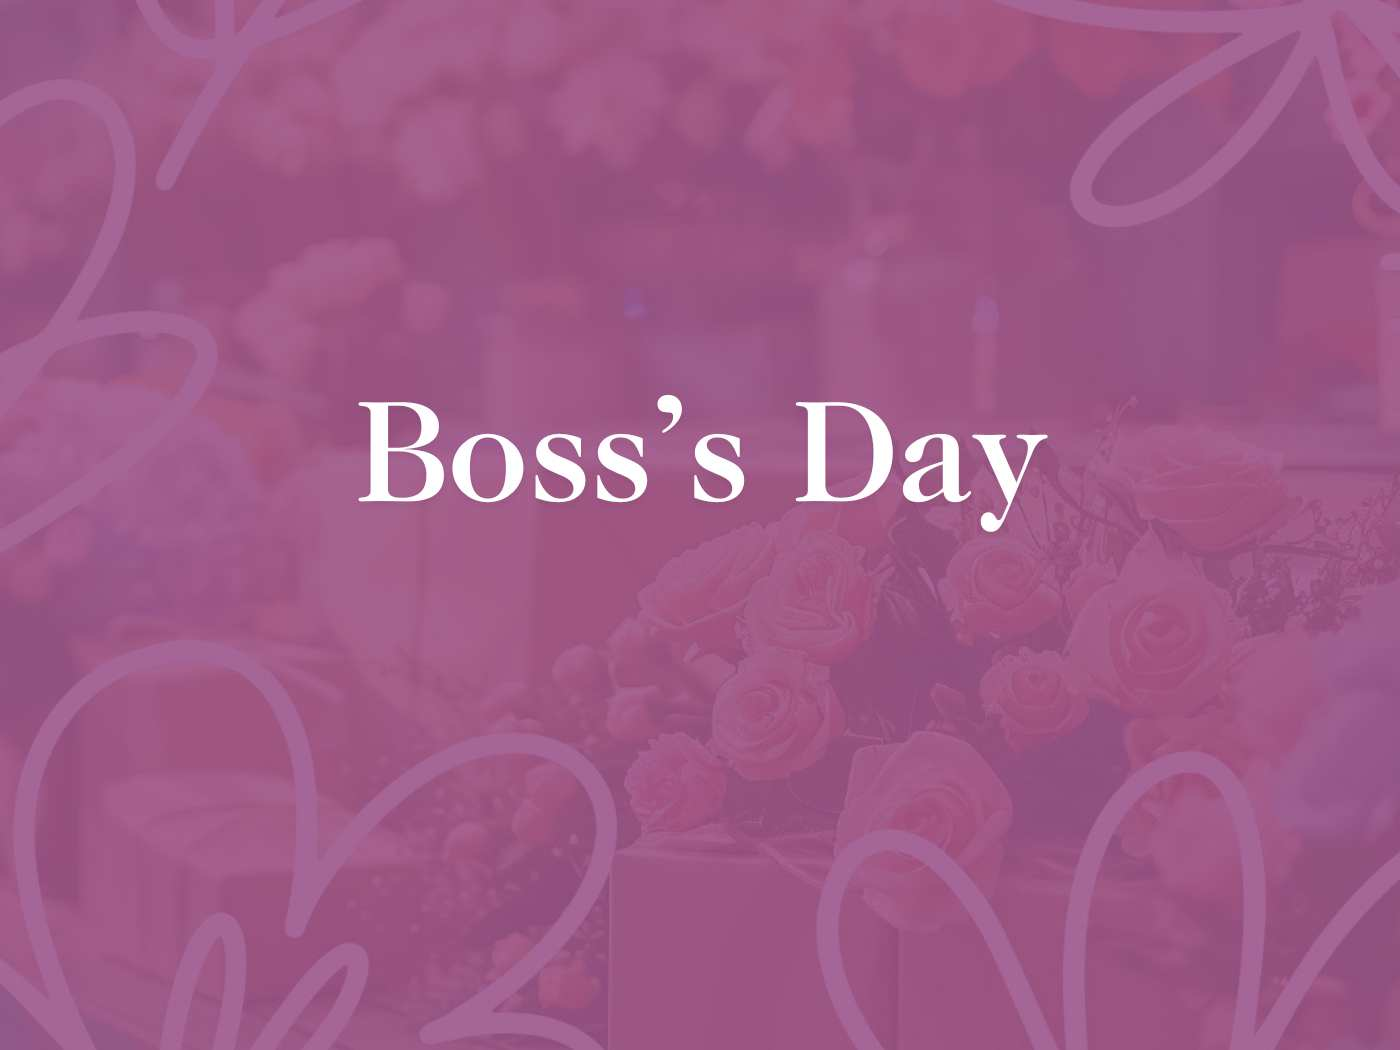 Elegant Boss's Day floral arrangement in soft pink hues for a heartfelt gesture of appreciation, presented by Fabulous Flowers and Gifts.